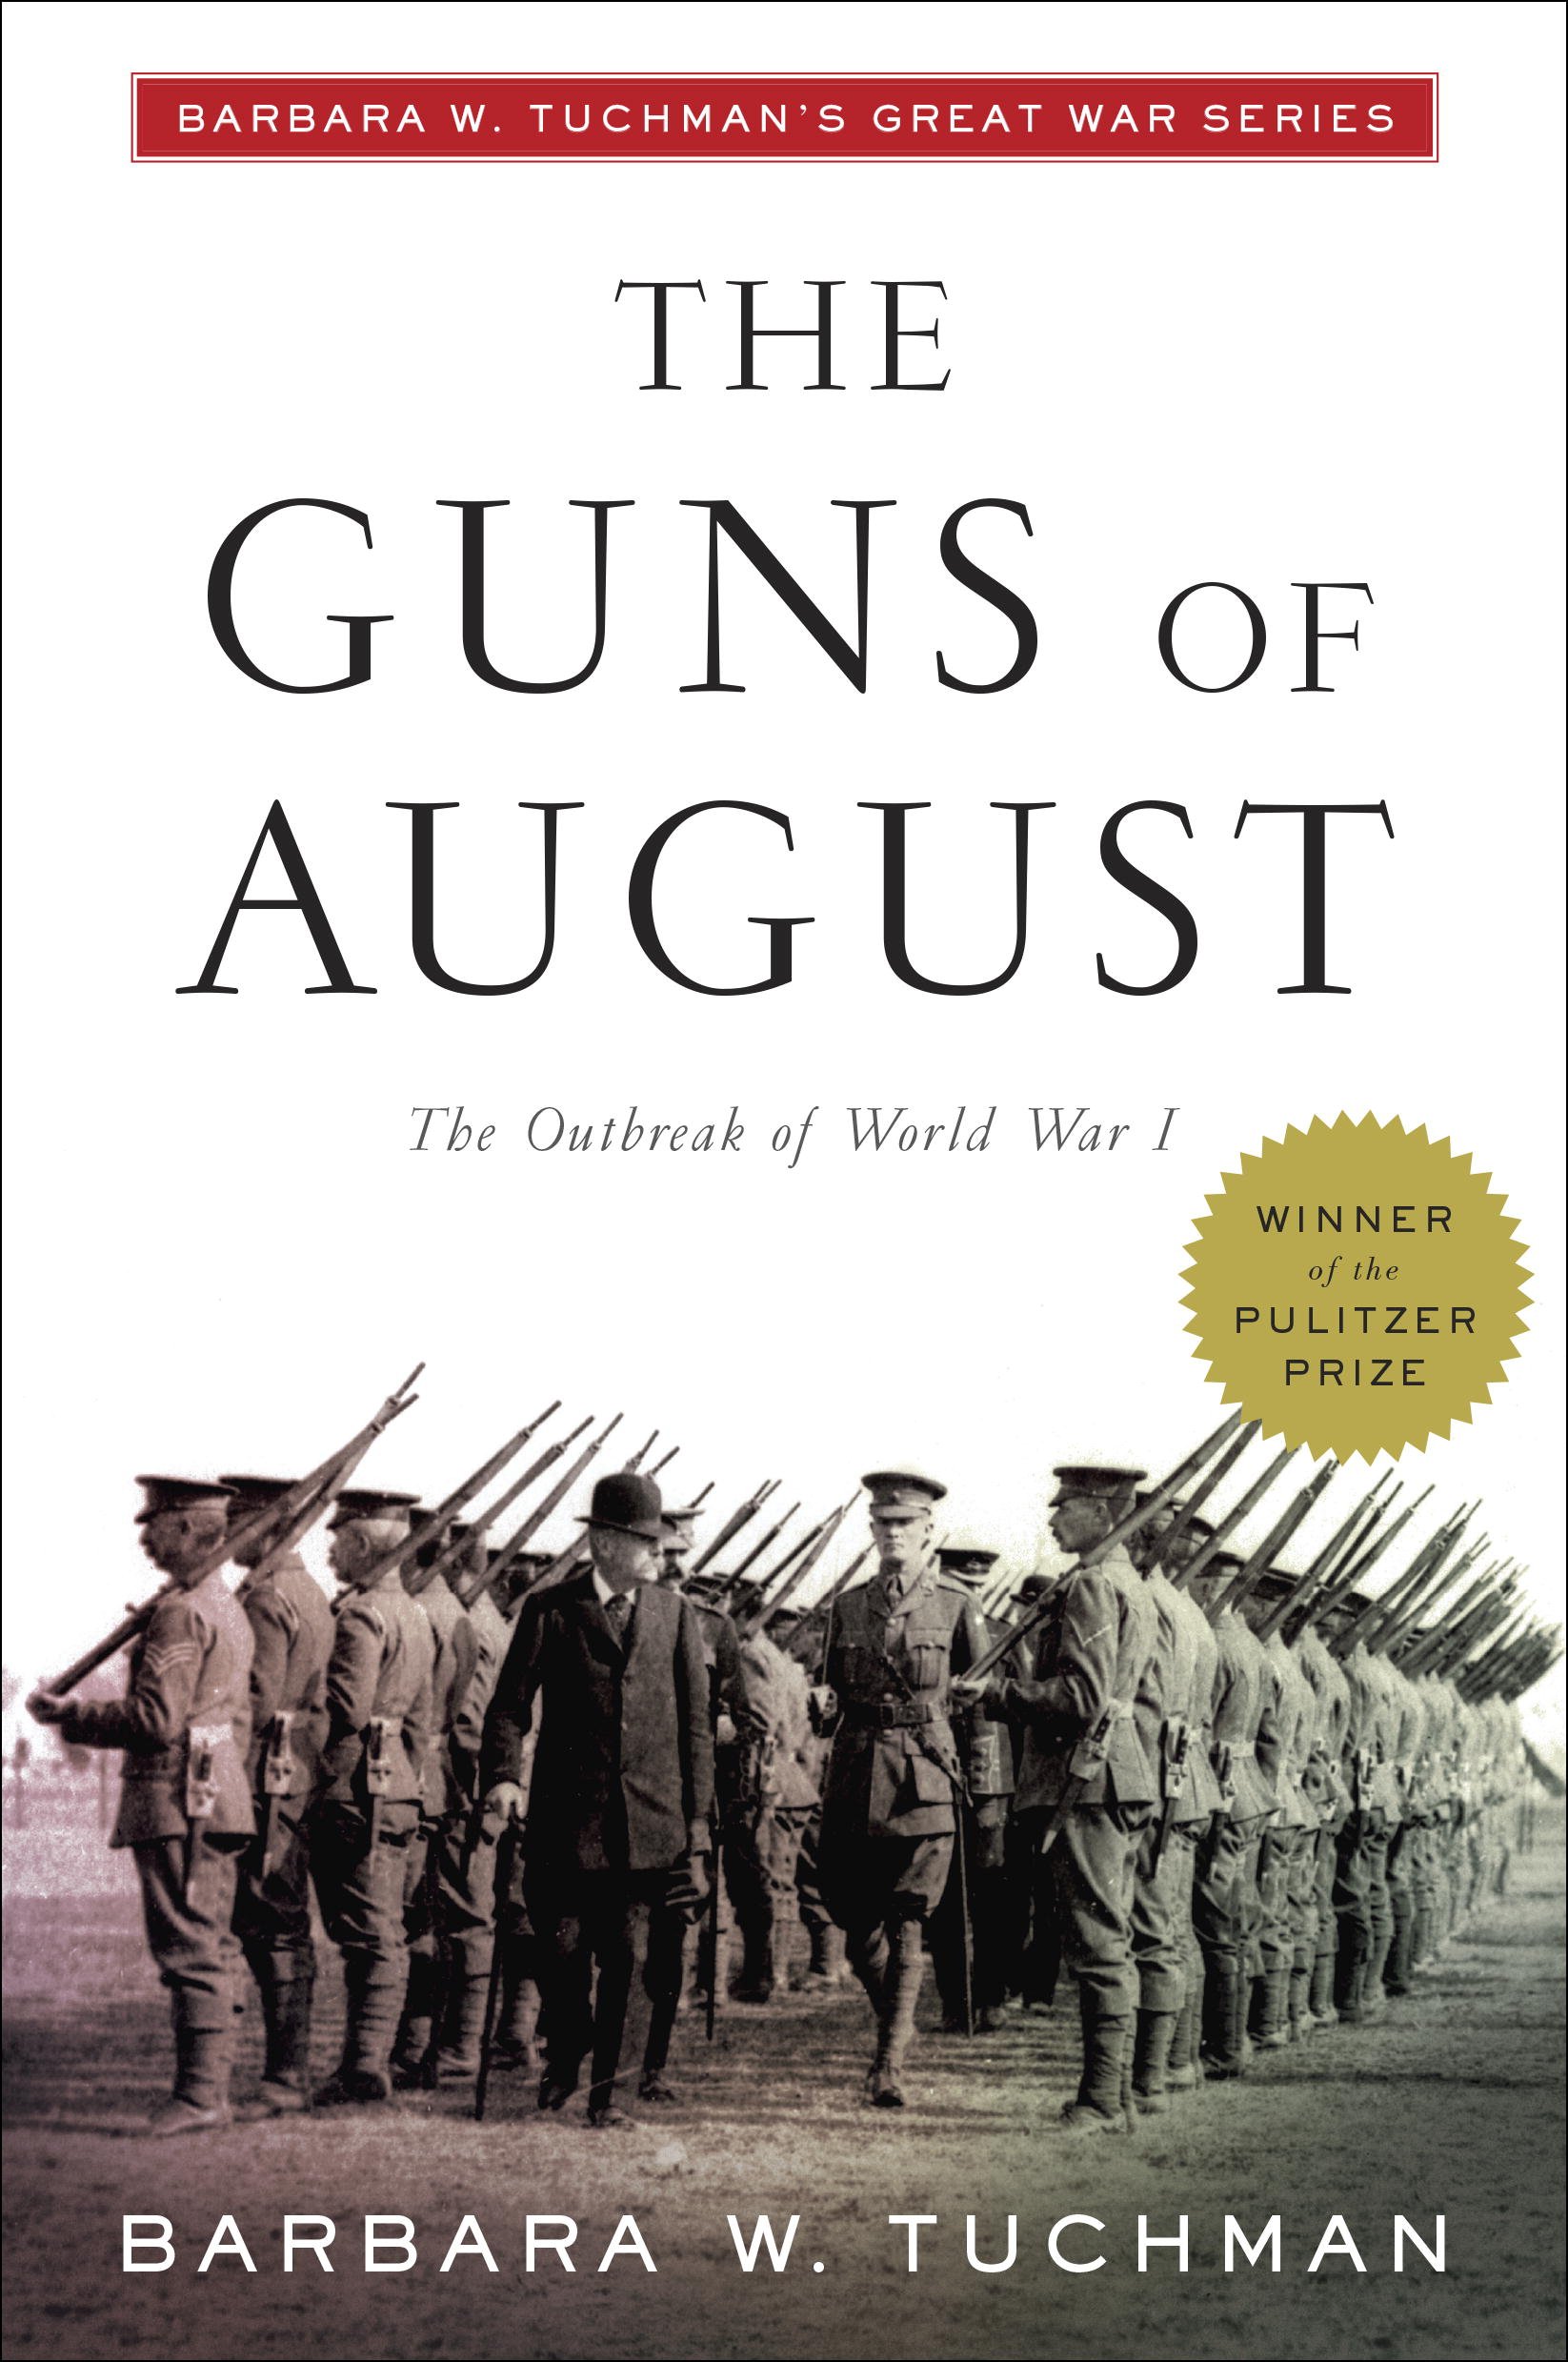 The Guns of August: The Outbreak of World War I; Barbara W. Tuchman's Great War Series (Modern Library 100 Best Nonfiction Books) (eBook) by Barbara W. Tuchman $1.99